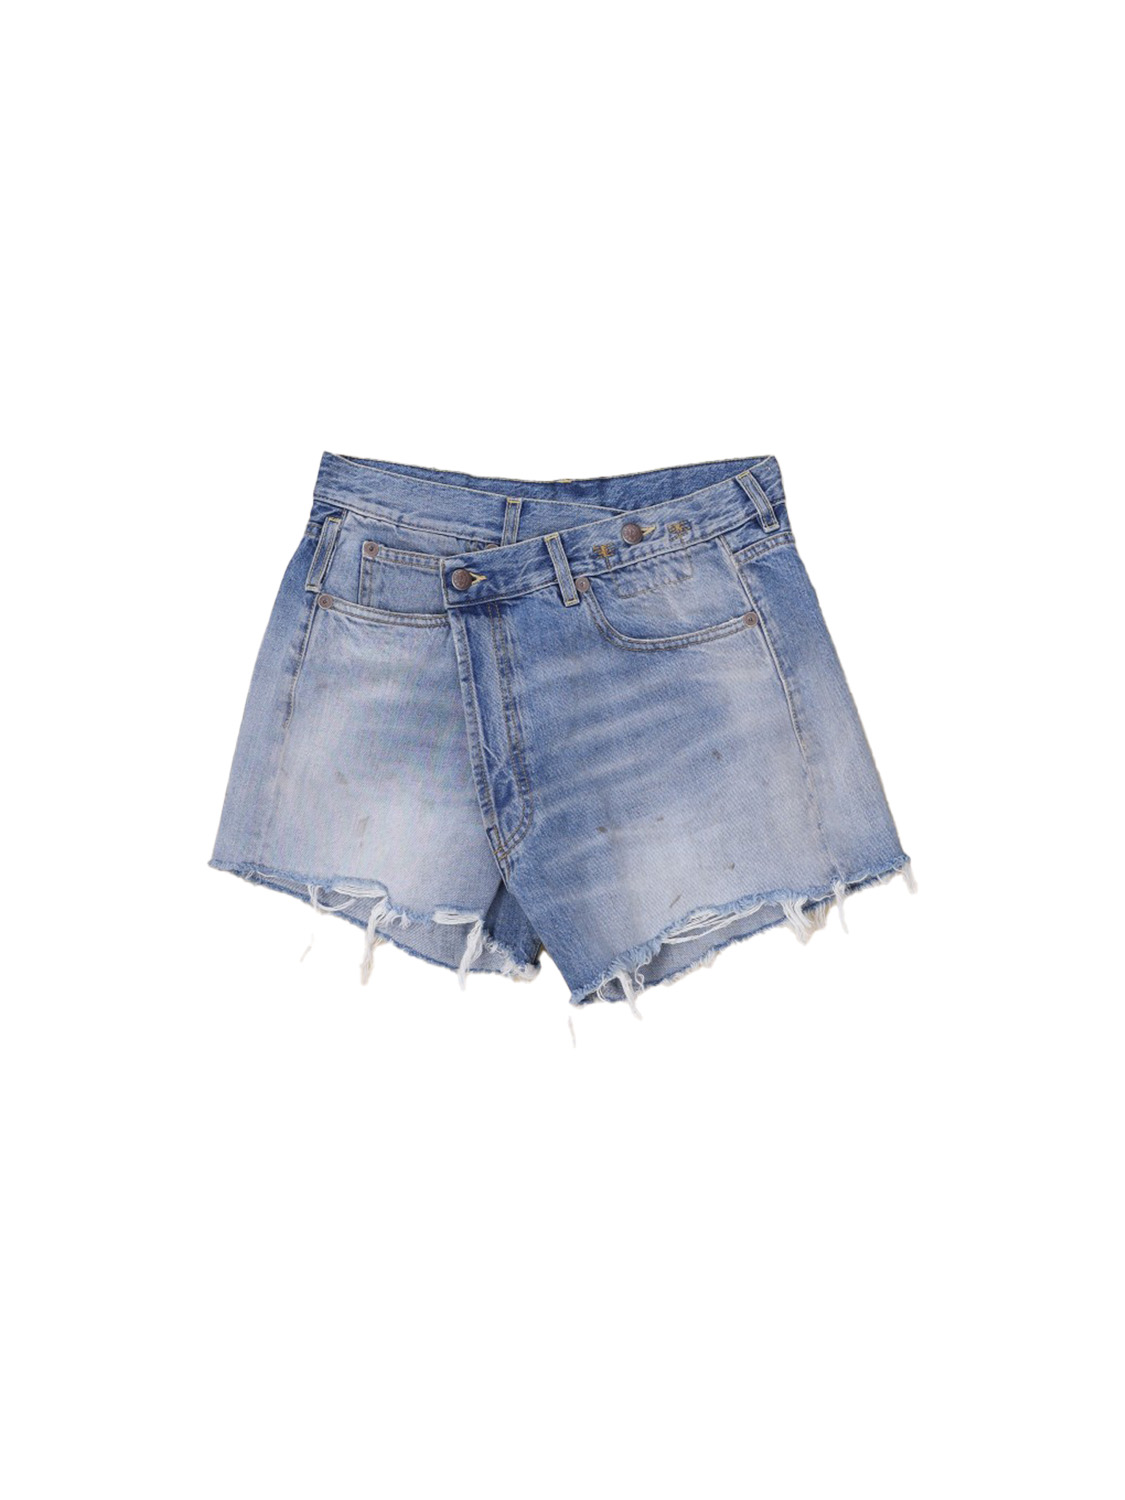 Crossover – Jeansshorts im Used Look  